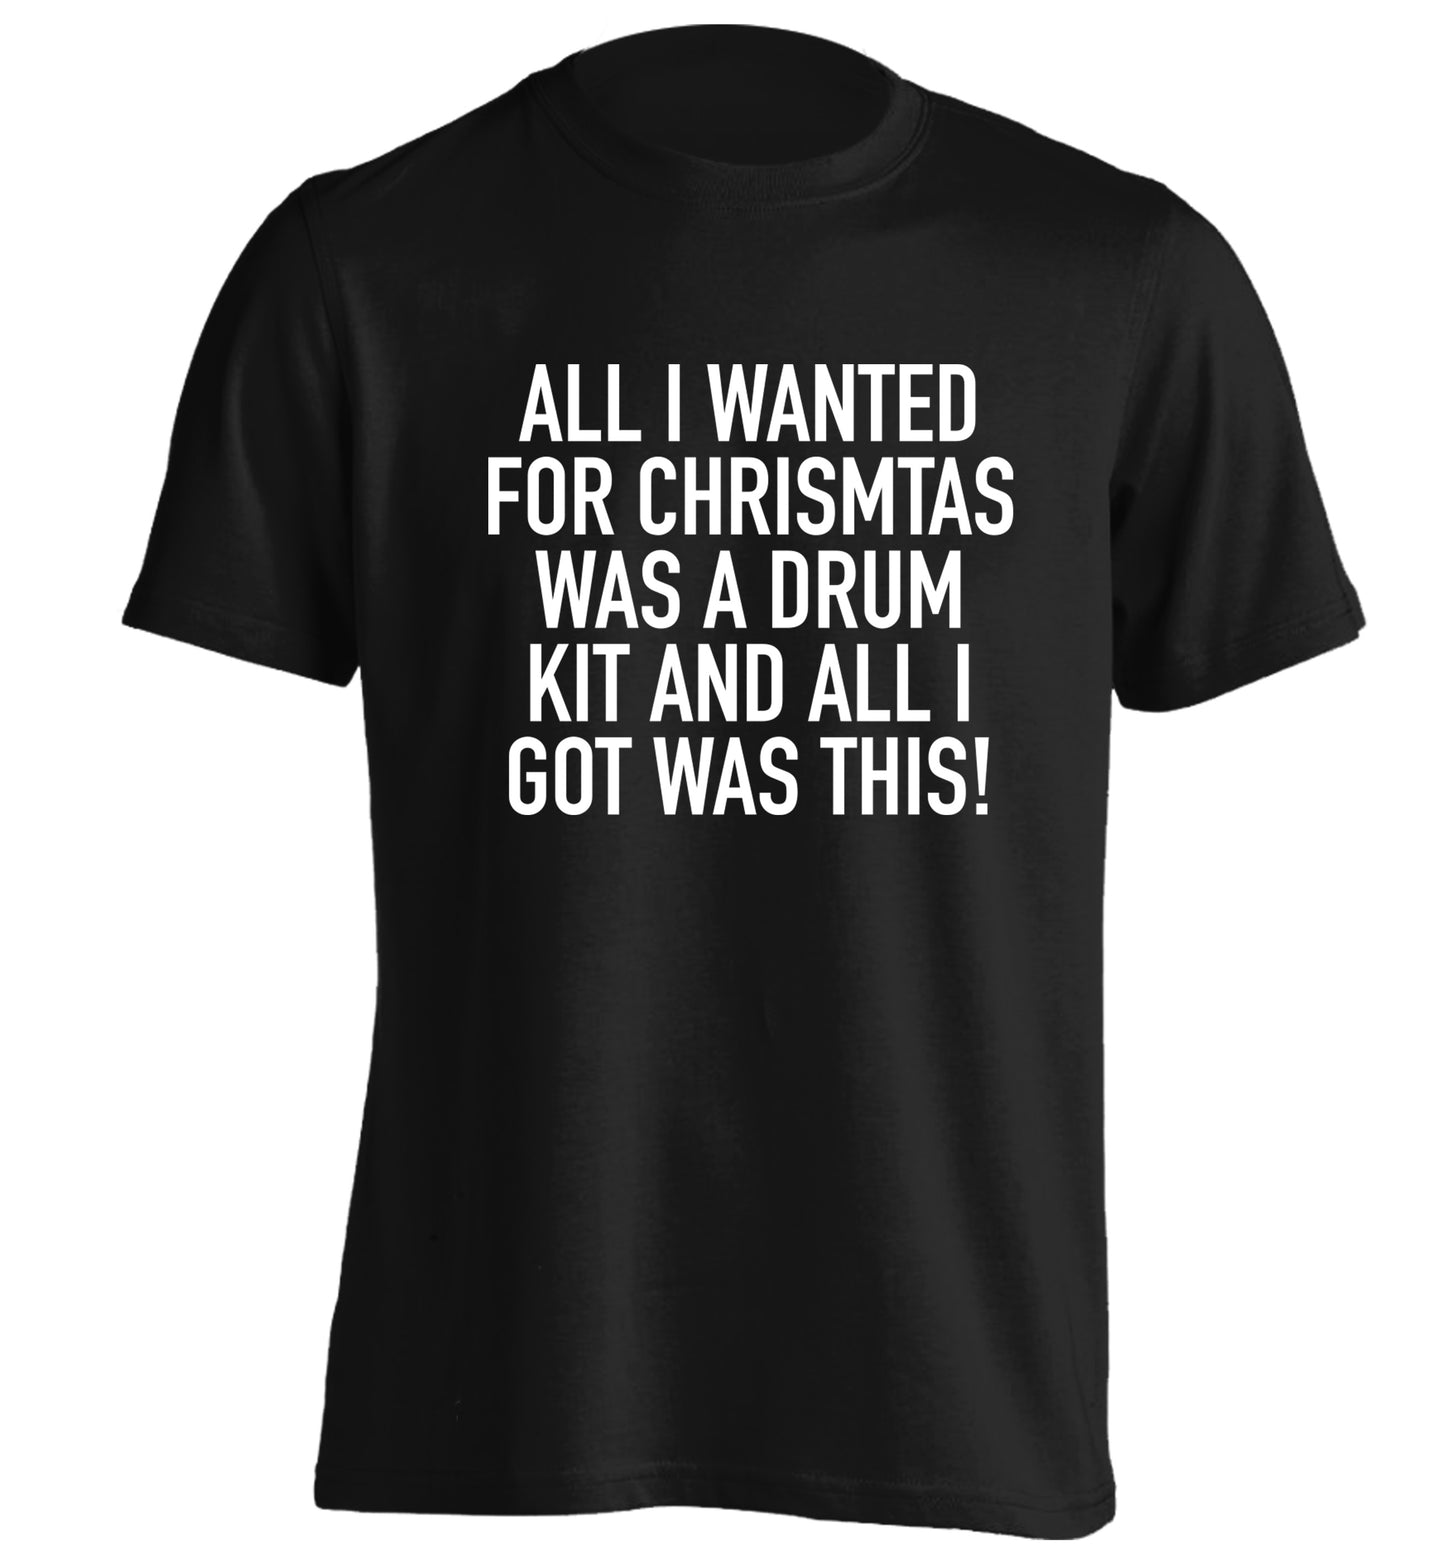 All I wanted for Christmas was a drum kit and all I got was this! adults unisex black Tshirt 2XL